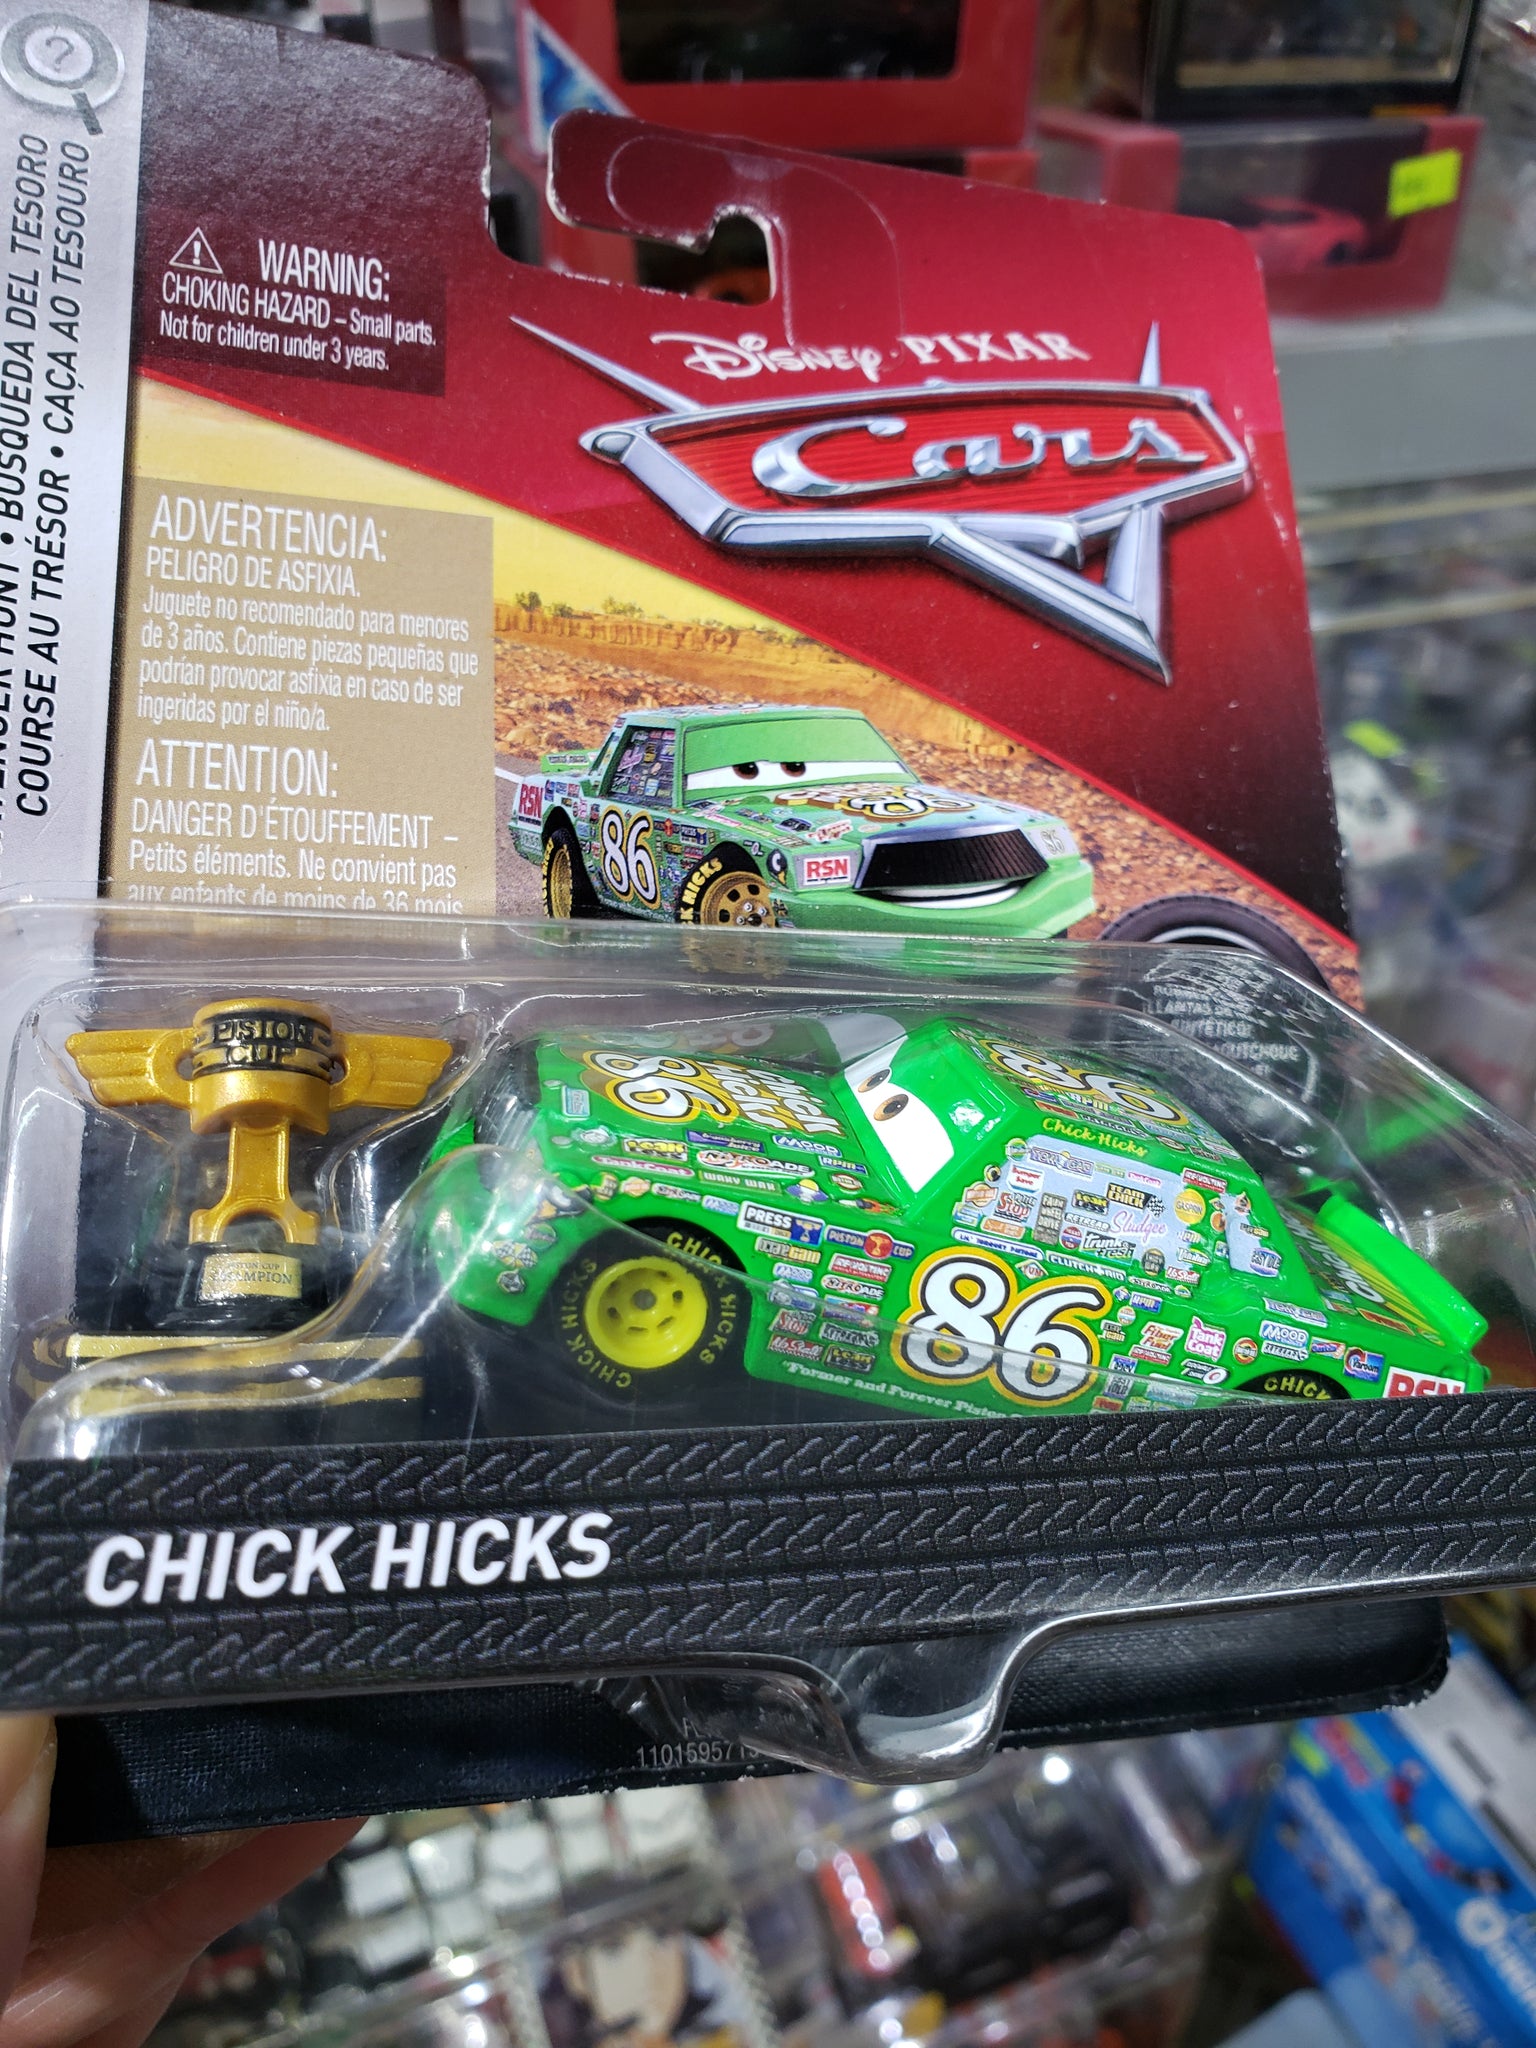 chick hicks with piston cup